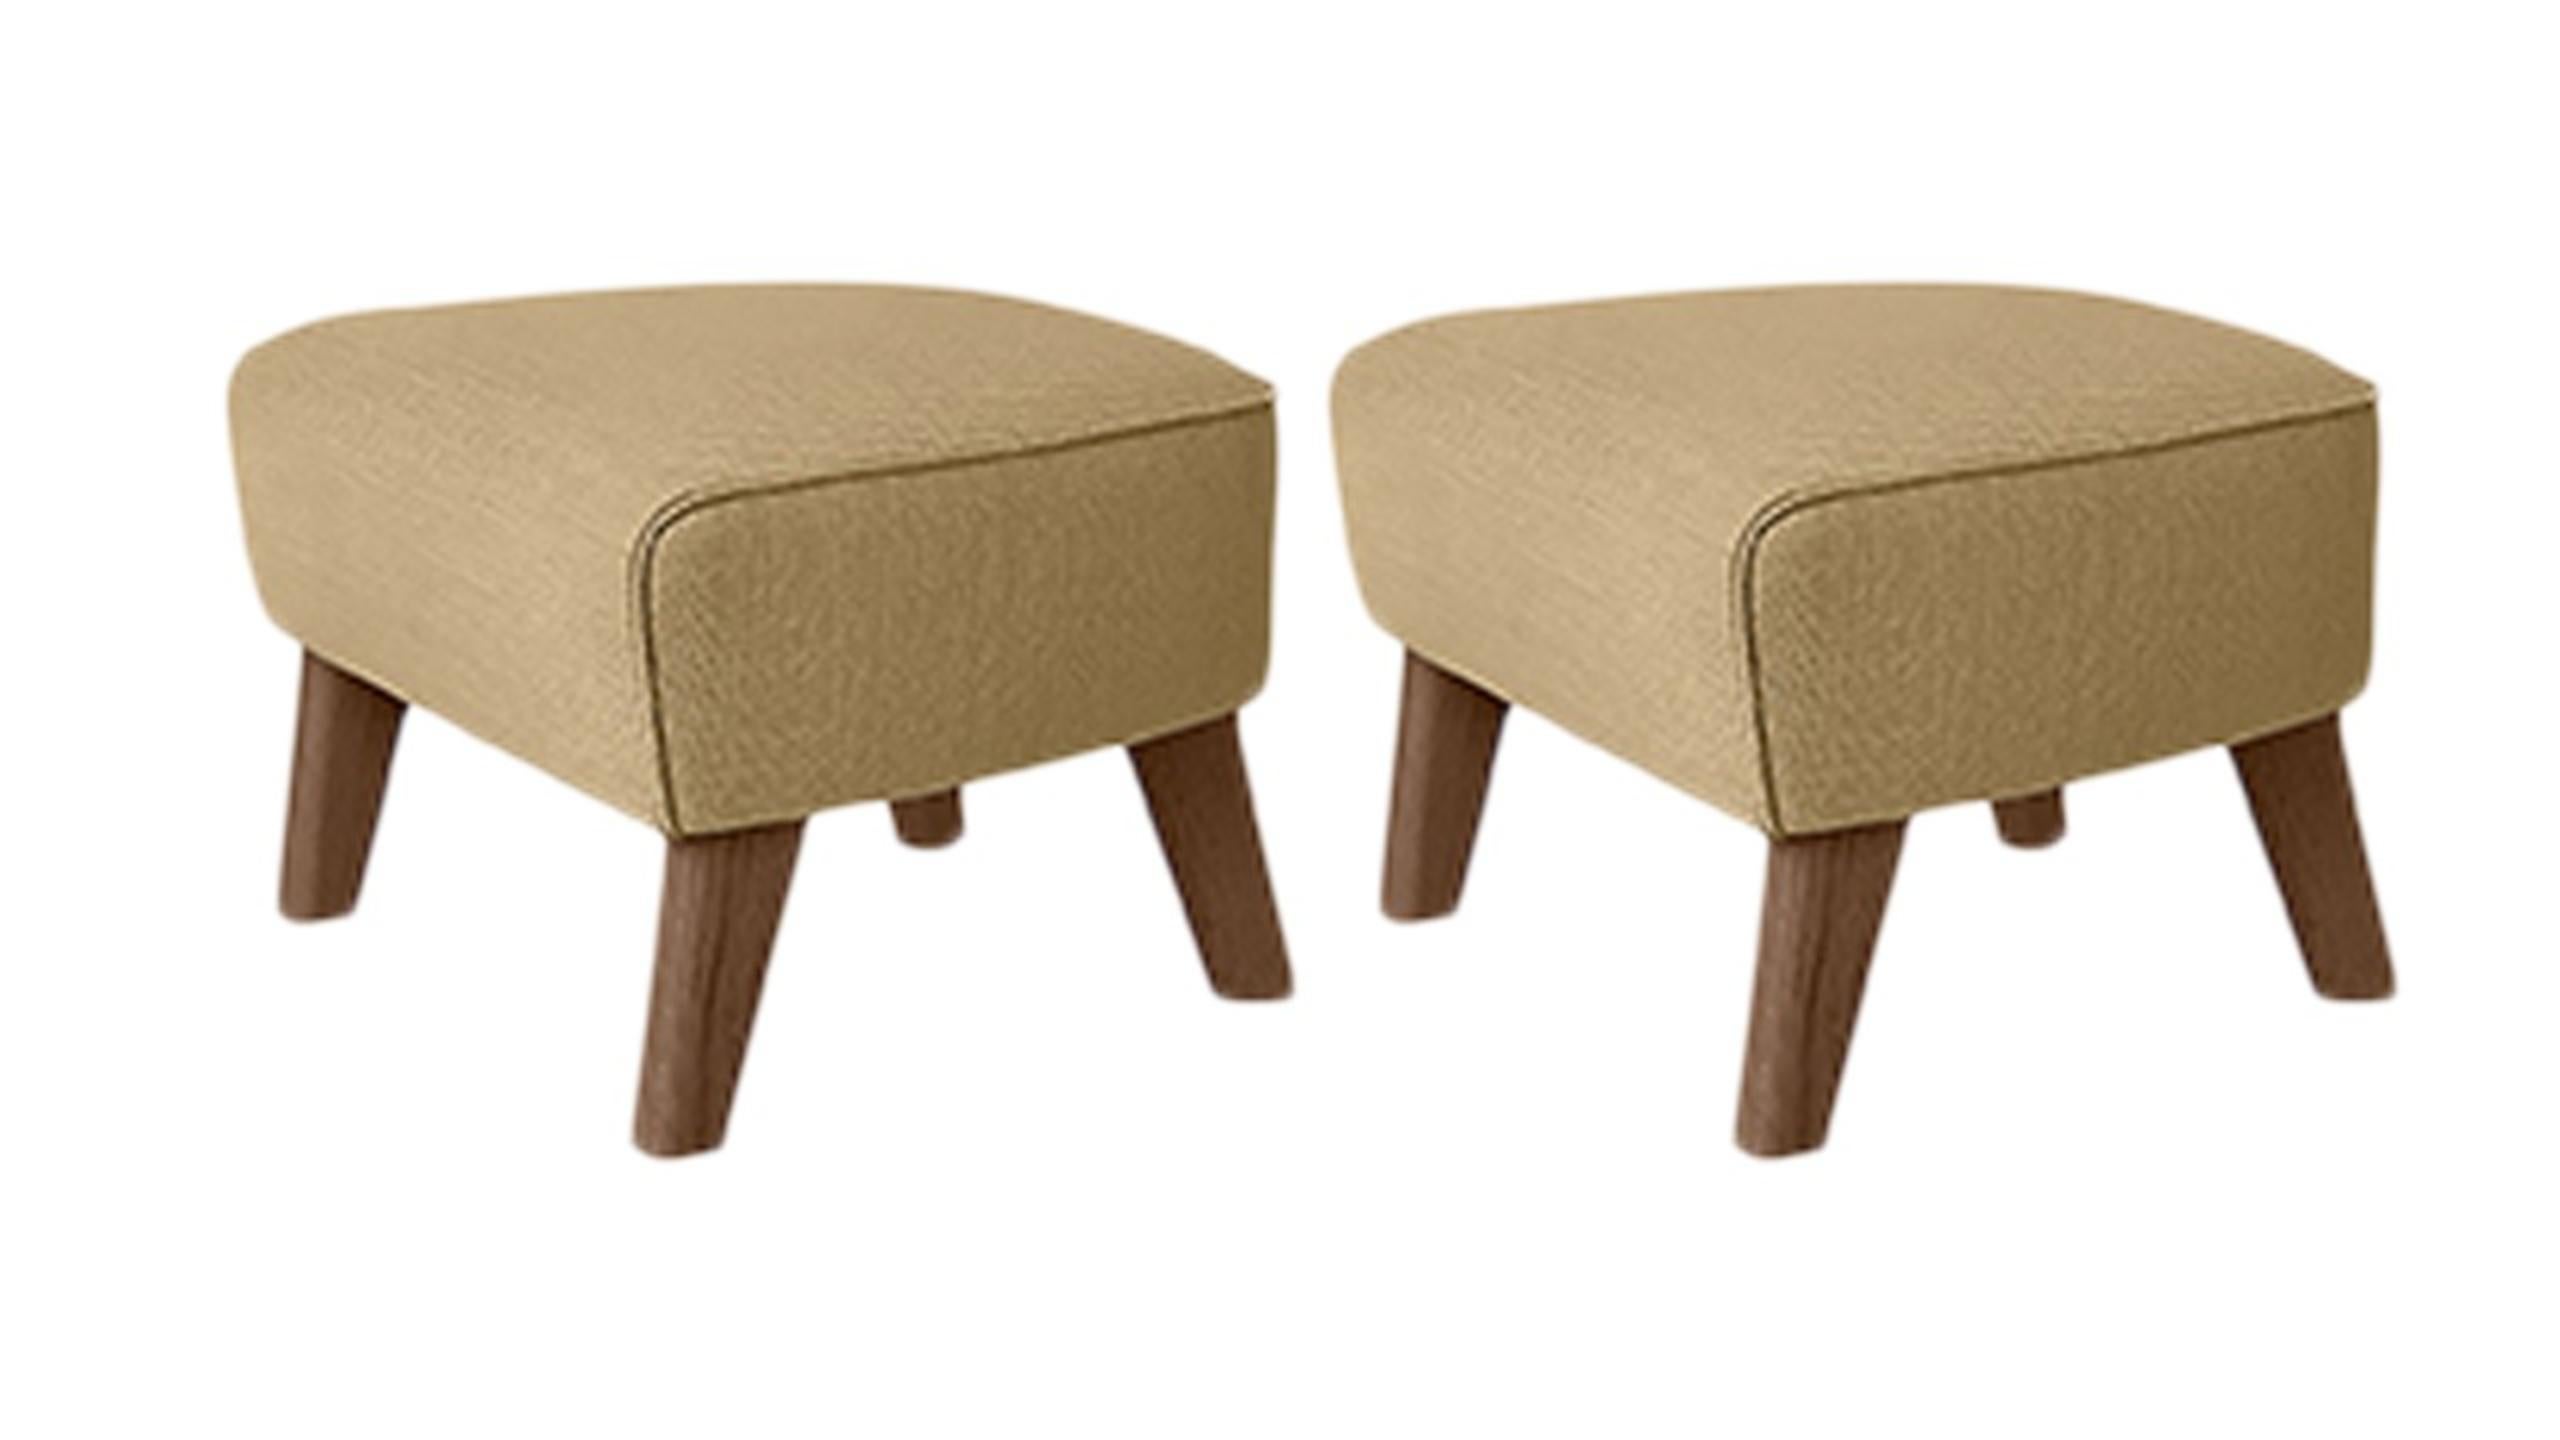 Set of 2 sand, smoked Oak Raf Simons Vidar 3 My Own Chair footstool by Lassen
Dimensions: W 56 x D 58 x H 40 cm 
Materials: Textile
Also Available: Other colors available.

The My Own Chair footstool has been designed in the same spirit as